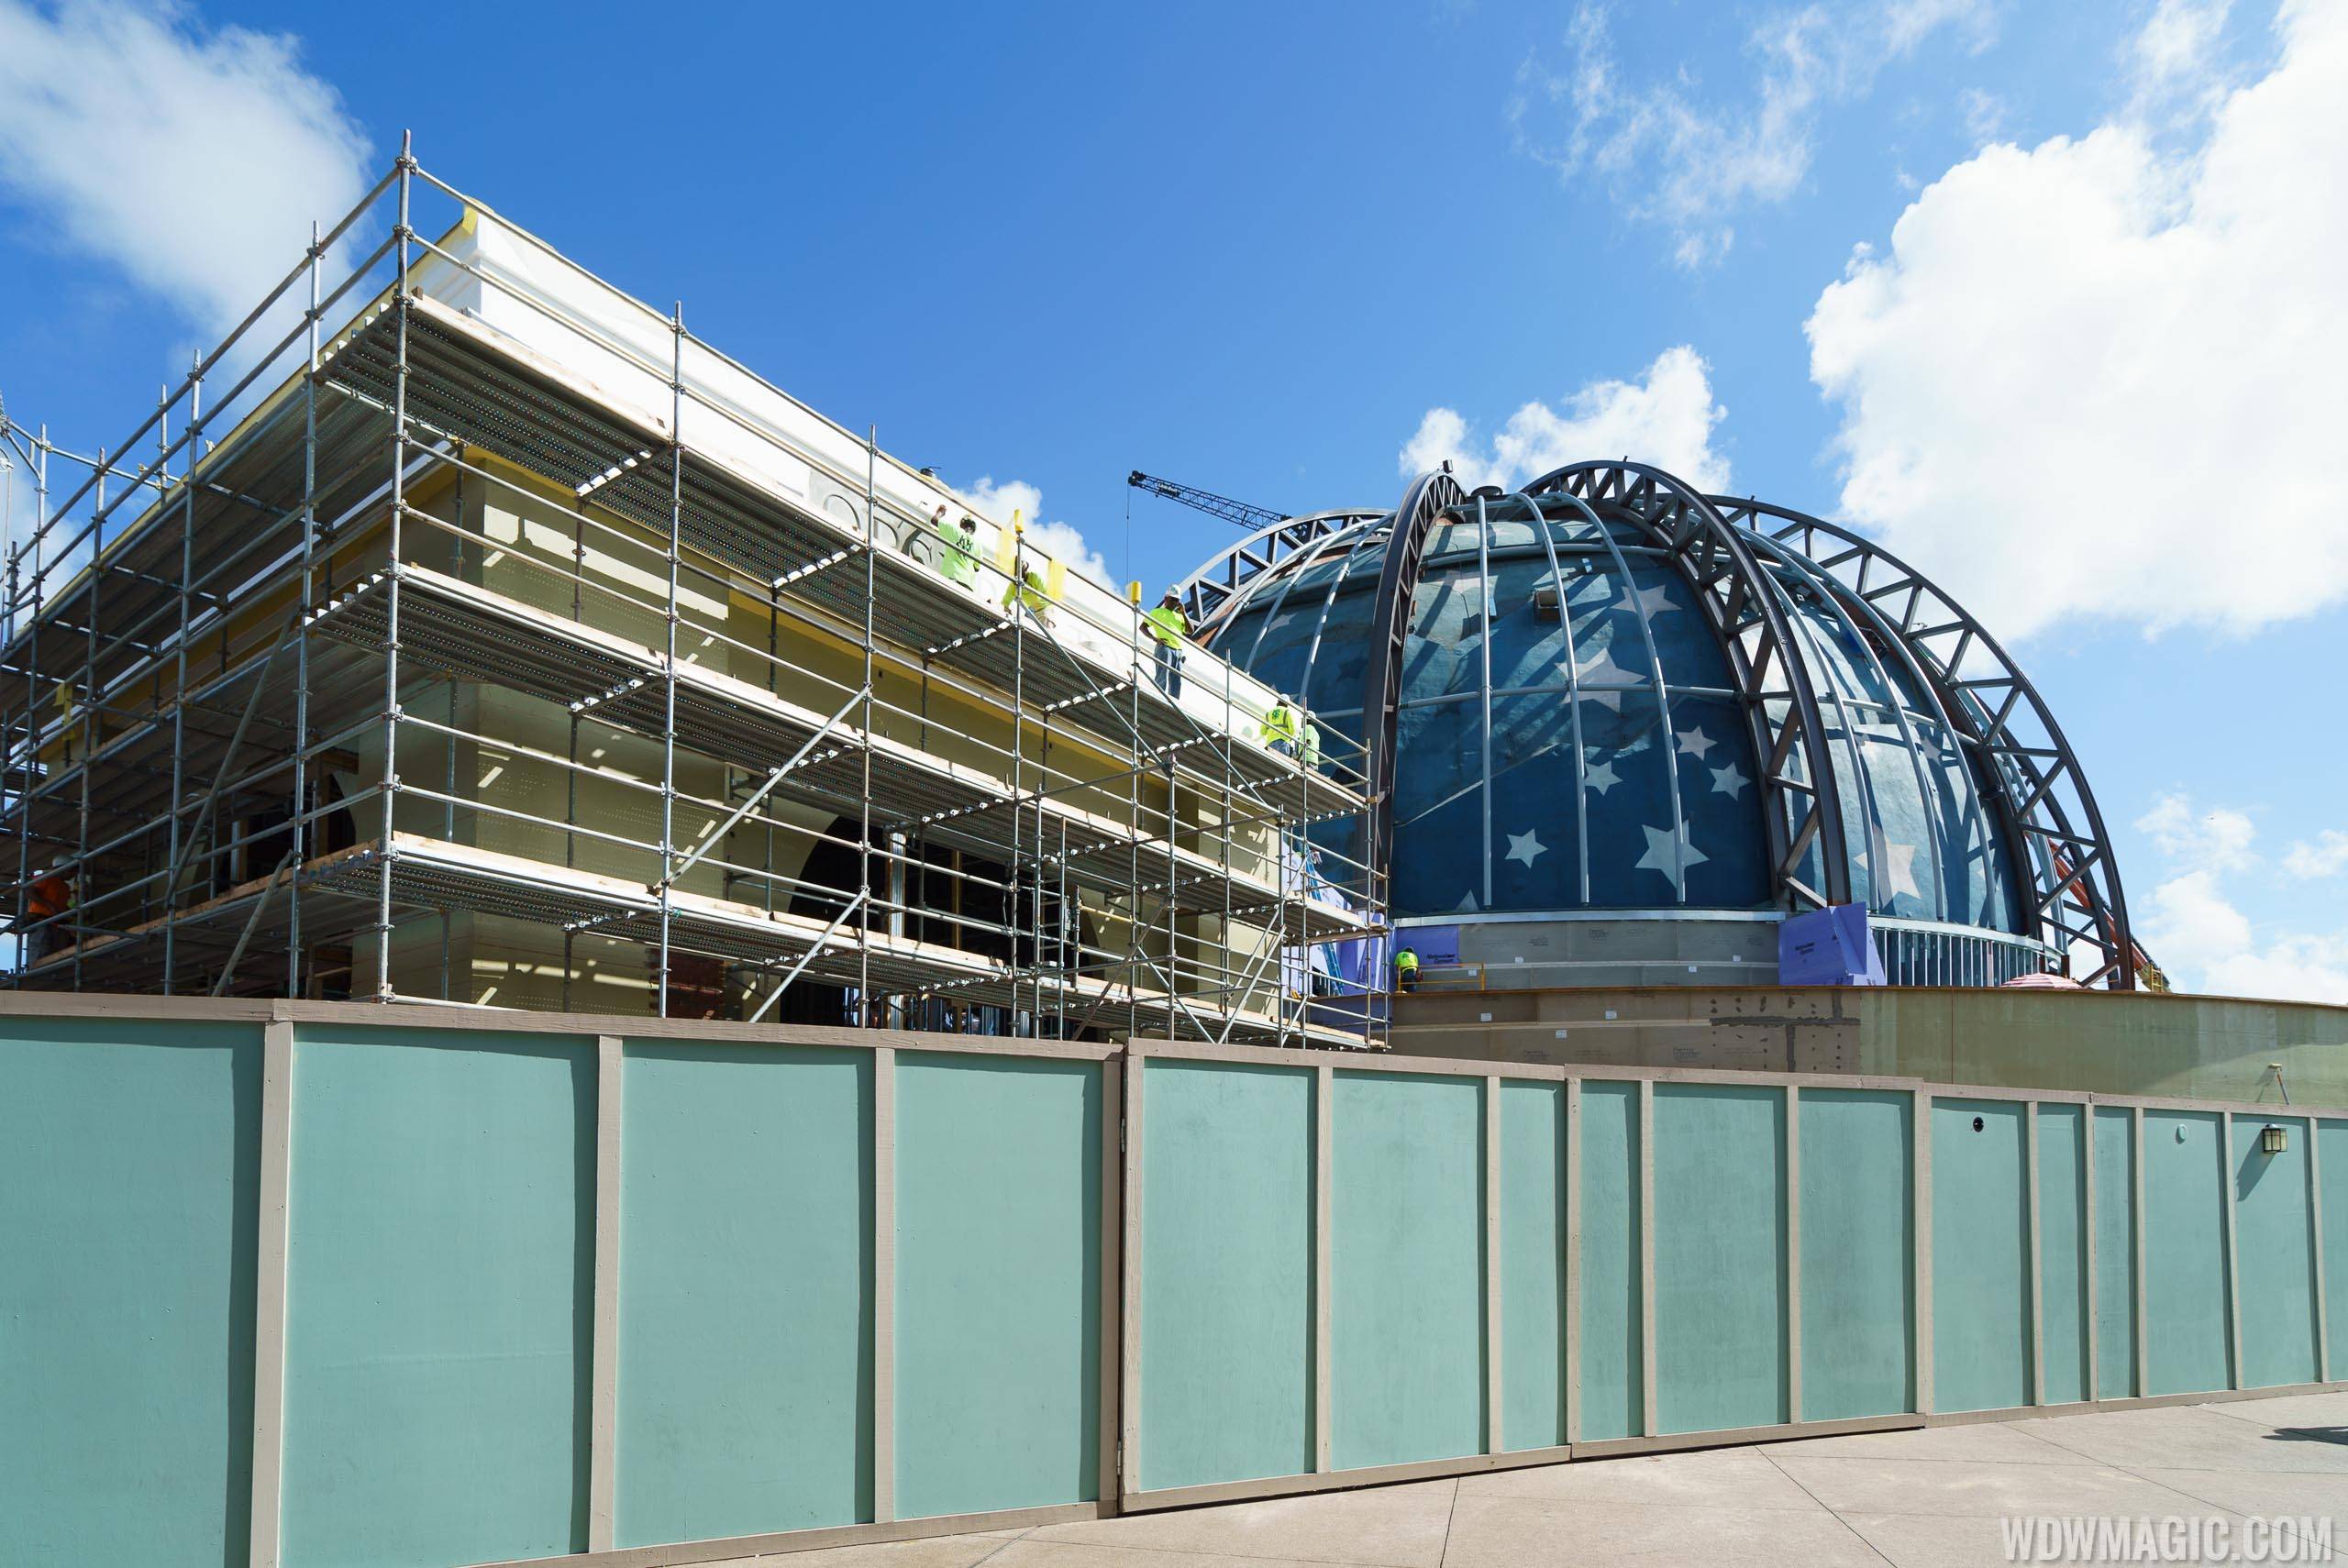 PHOTOS - Planet Hollywood Observatory construction update